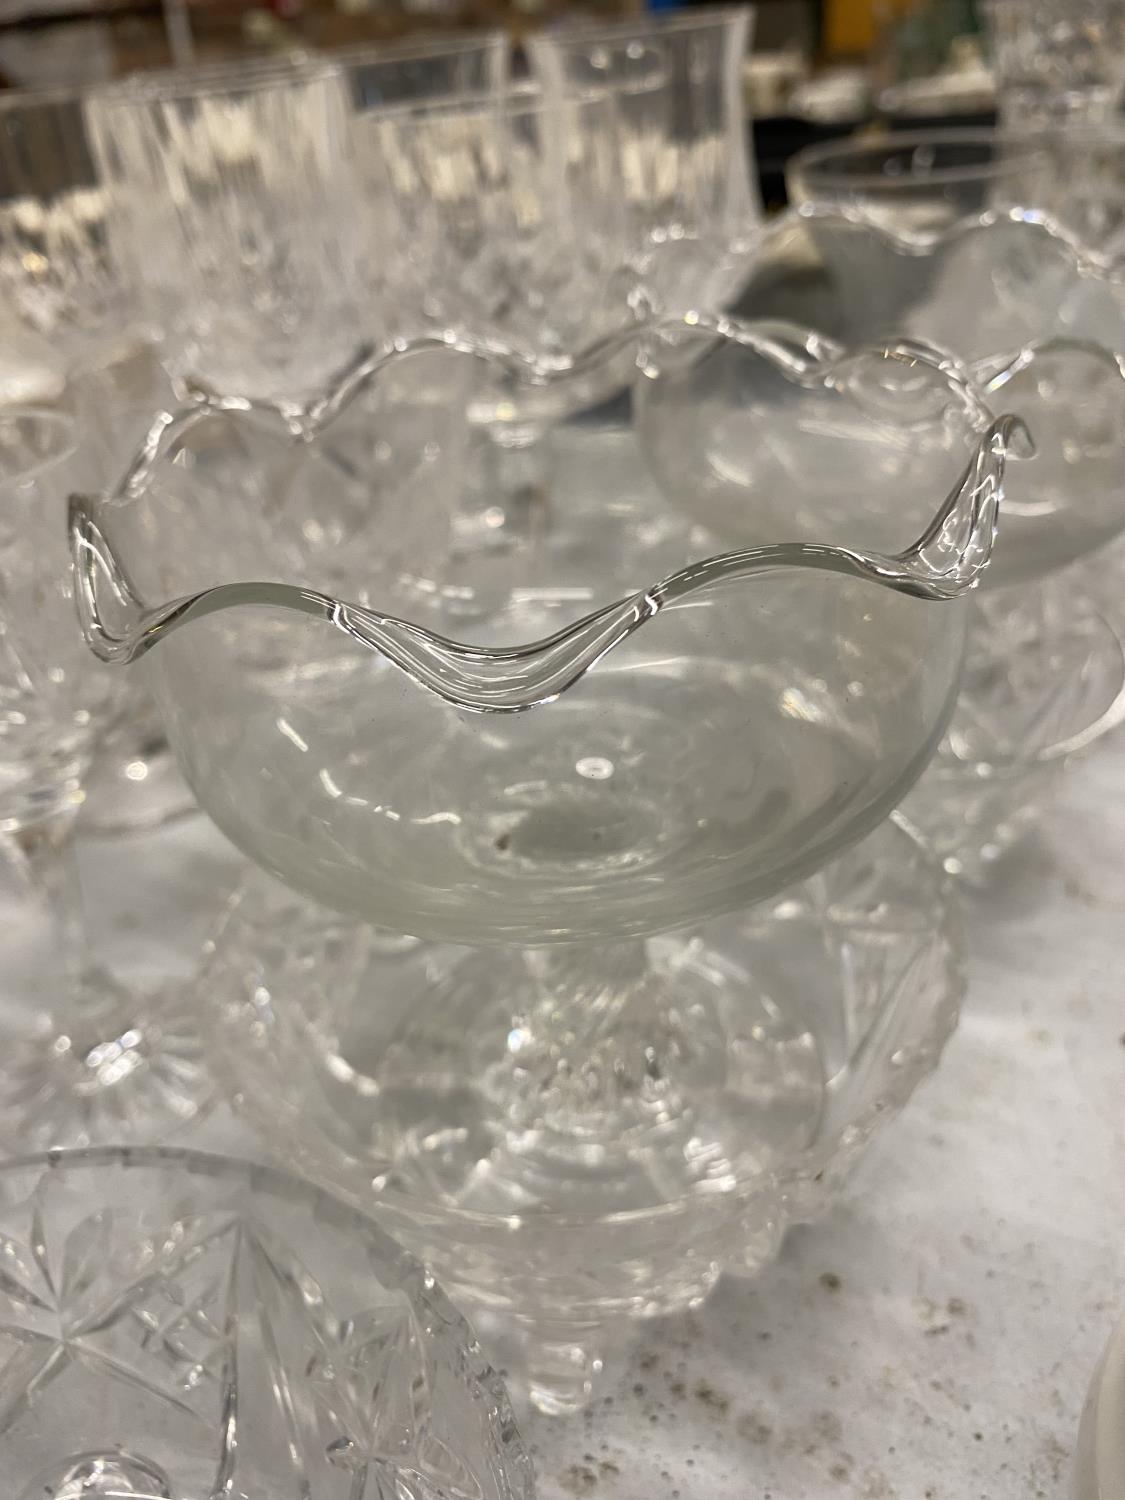 VARIDISHES ETCOUS ITEMS OF GLASSWARE TO INCLUDE GLASSES, DISHES ETC - Image 3 of 8